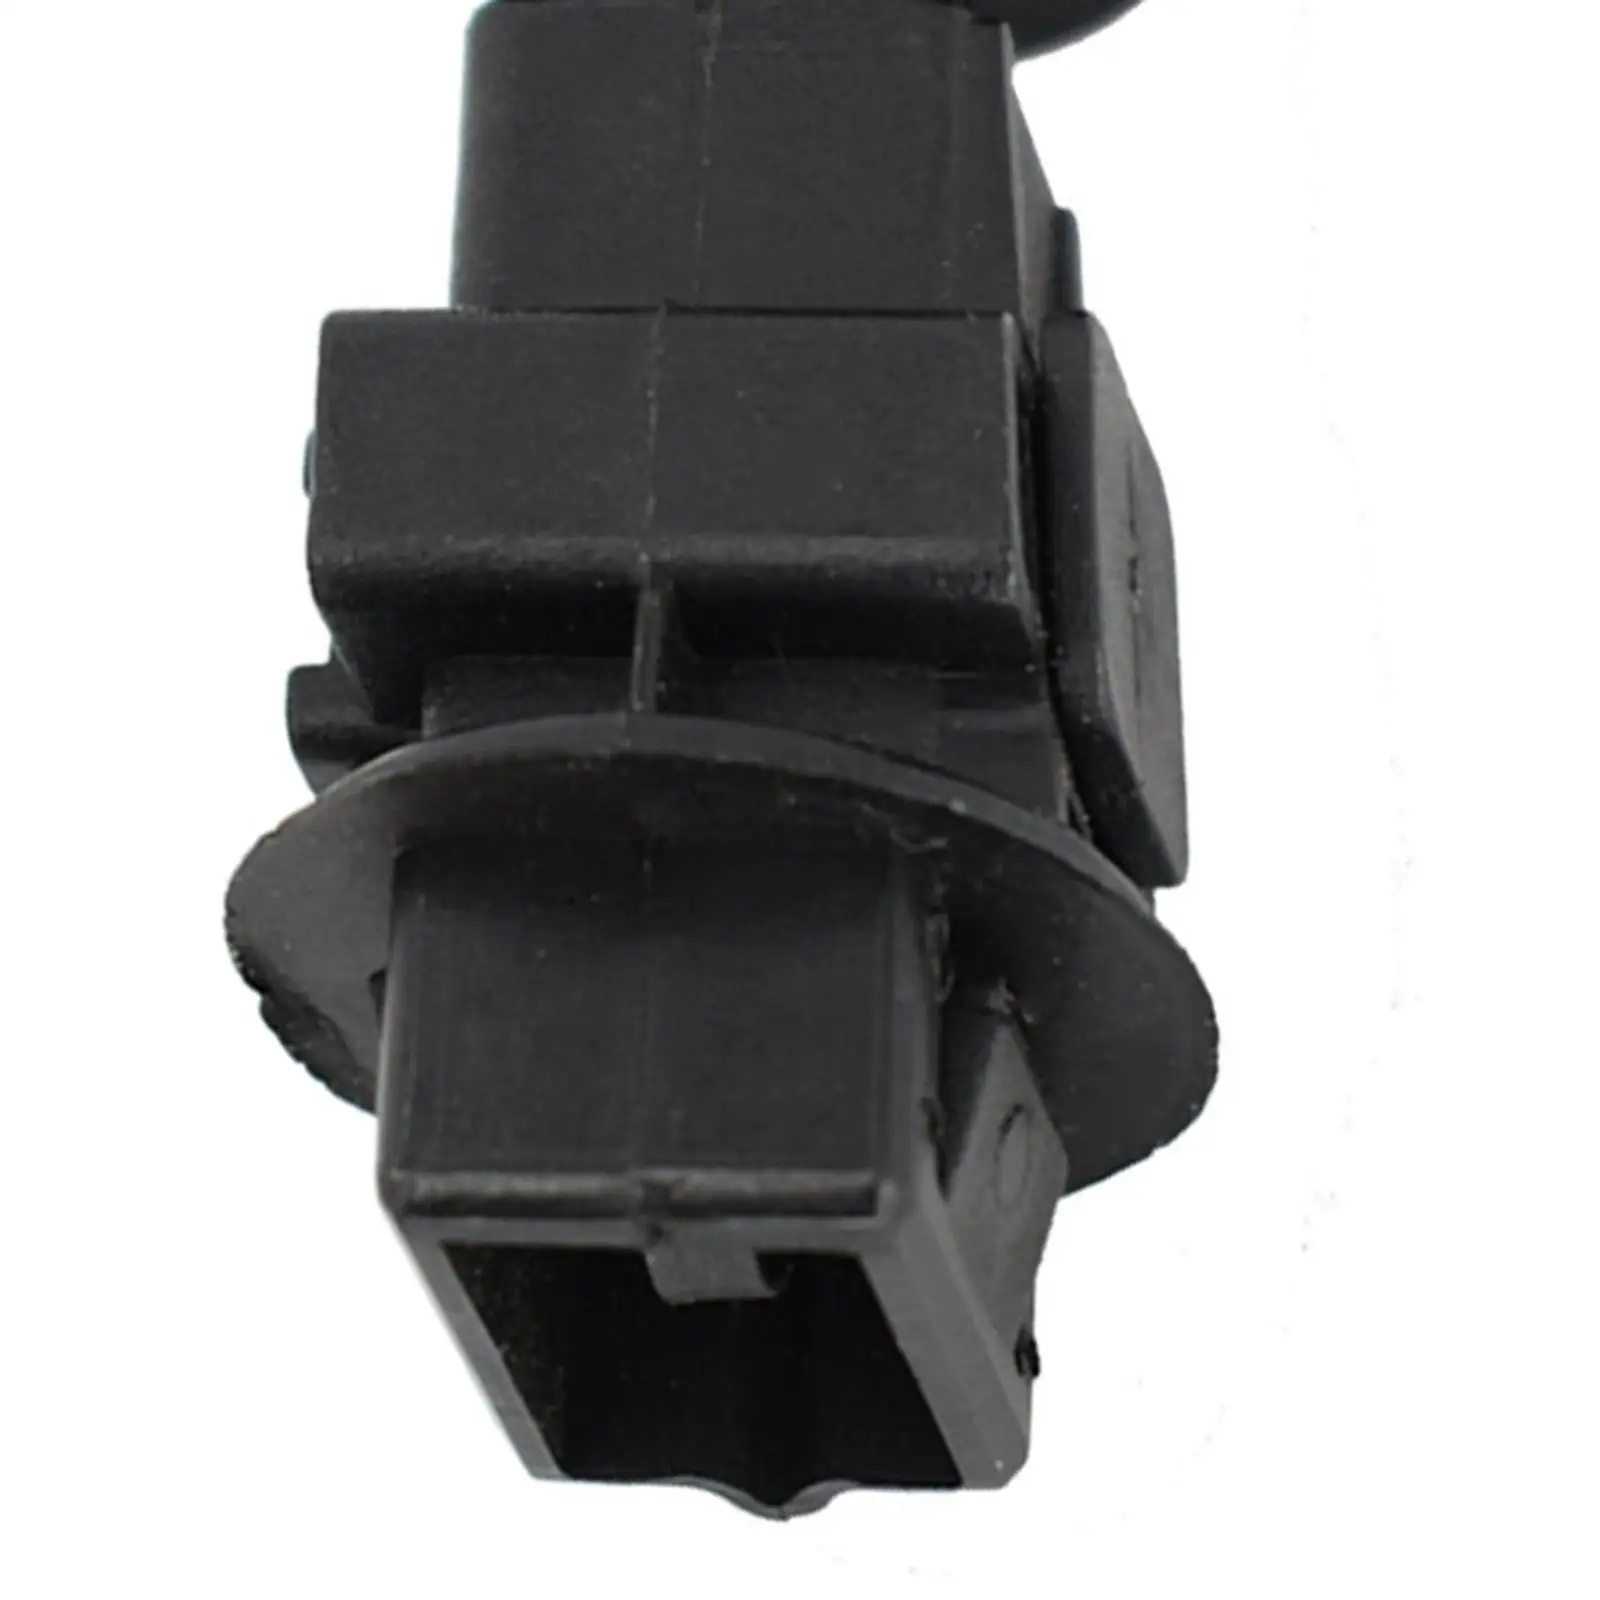 Rear Trunk Stop Buffer 65822-br00A Car Parts Hood Stop Support Buffer Hood Stopper Cushion for Nissan Qashqai